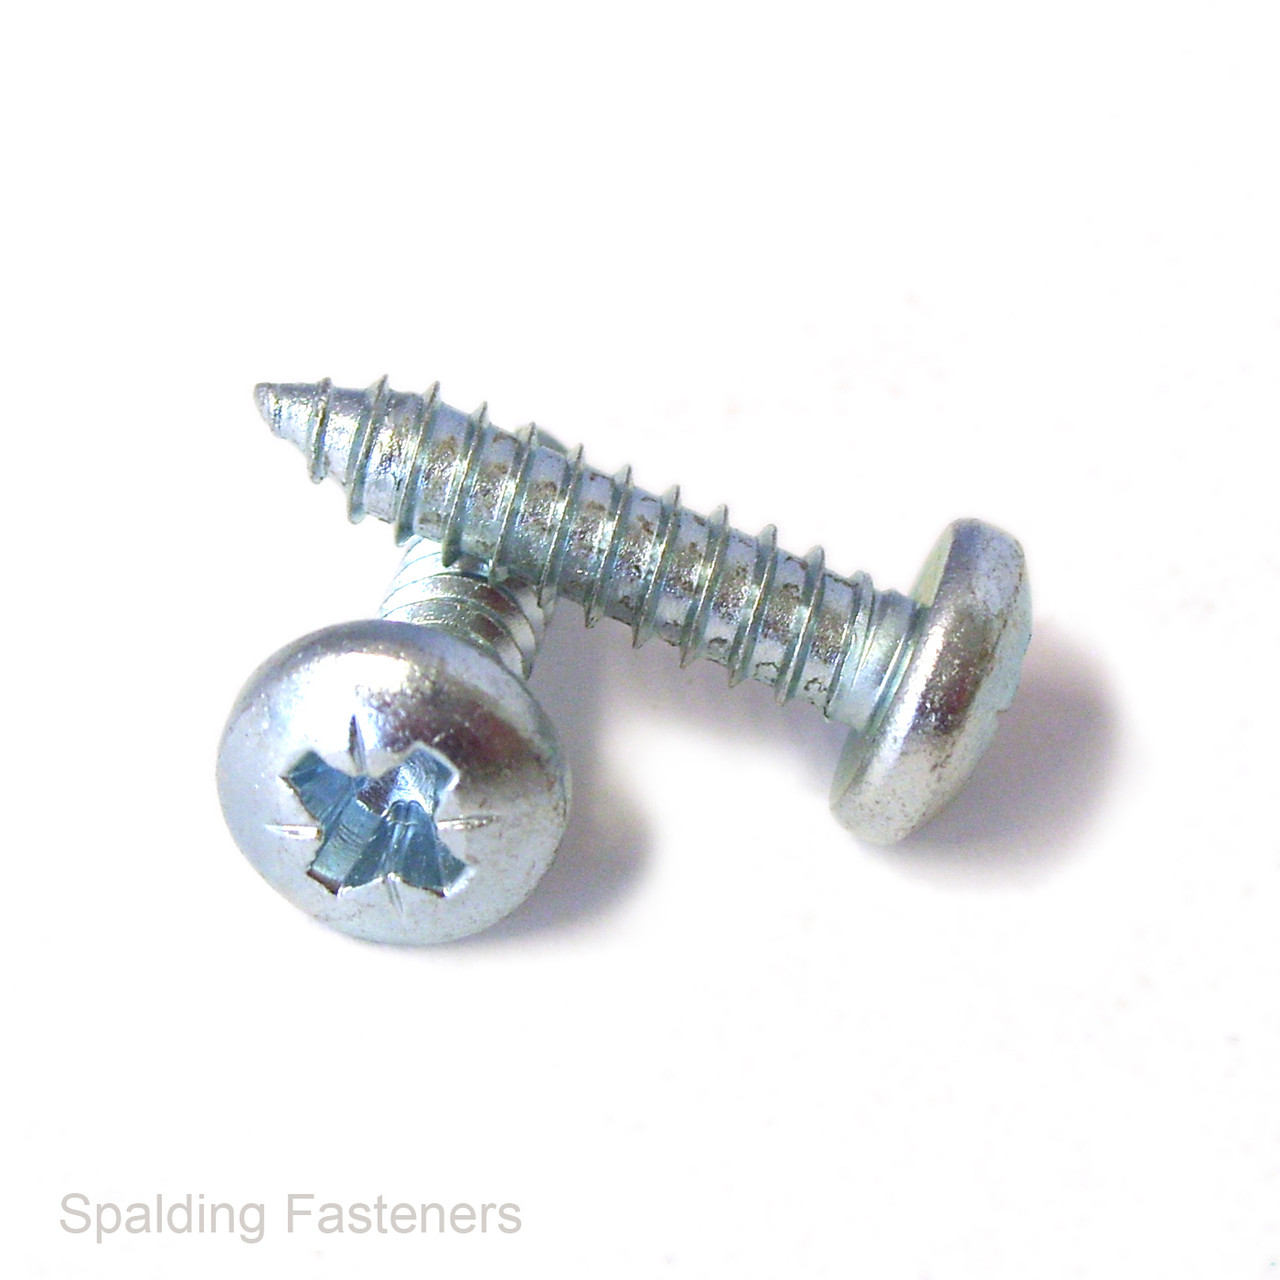 No.12 Zinc Plated Pan Pozi Head Self Tapping Screws Spalding Fasteners